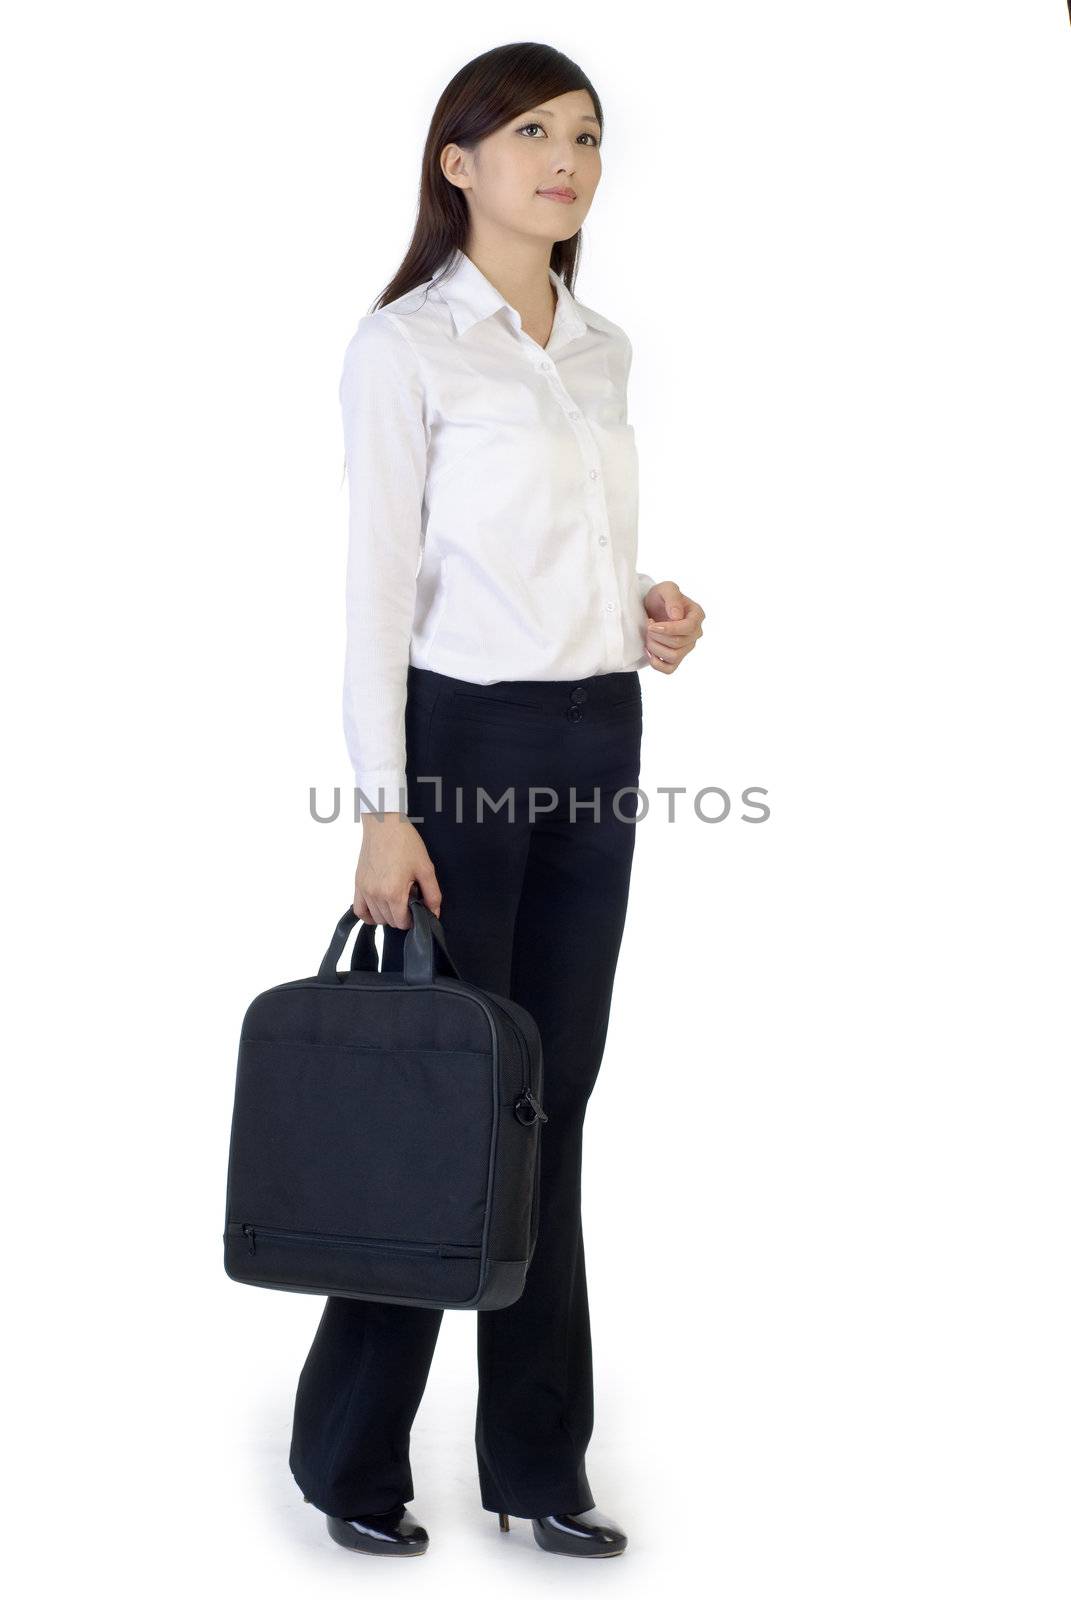 Business woman with briefcase, full length portrait of oriental office lady isolated on white background.